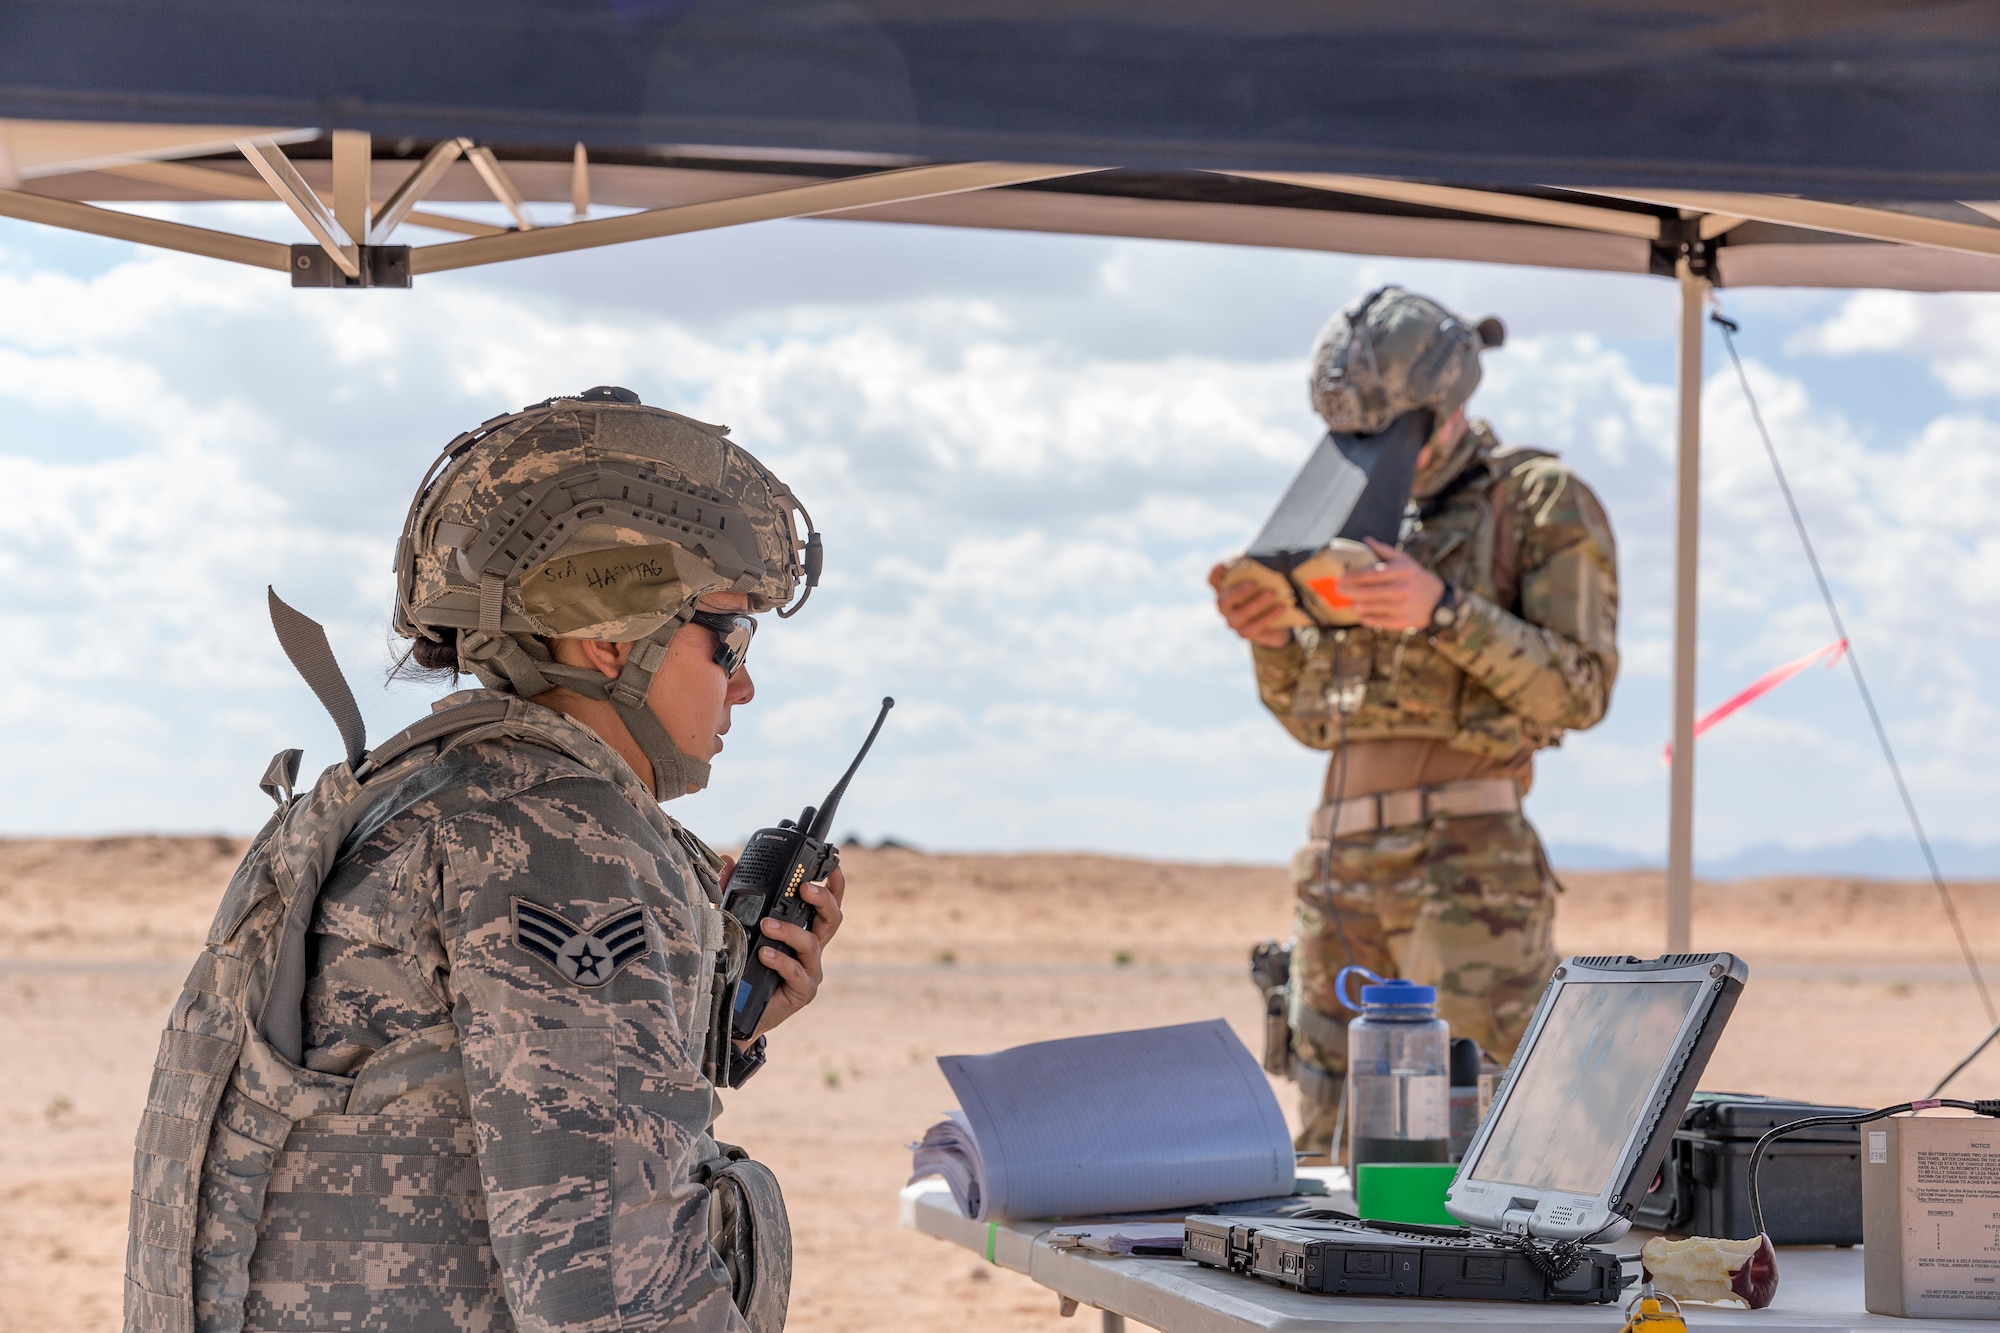 Senior Airman Alexandra Haytasingh (left) and Airman 1st Class Jedidiah Burlando work together to navigate the RQ-11B Raven DDL during the first training qualification program on the unmanned aircraft system for the Air Force at McGregor Range, N.M., July 6.